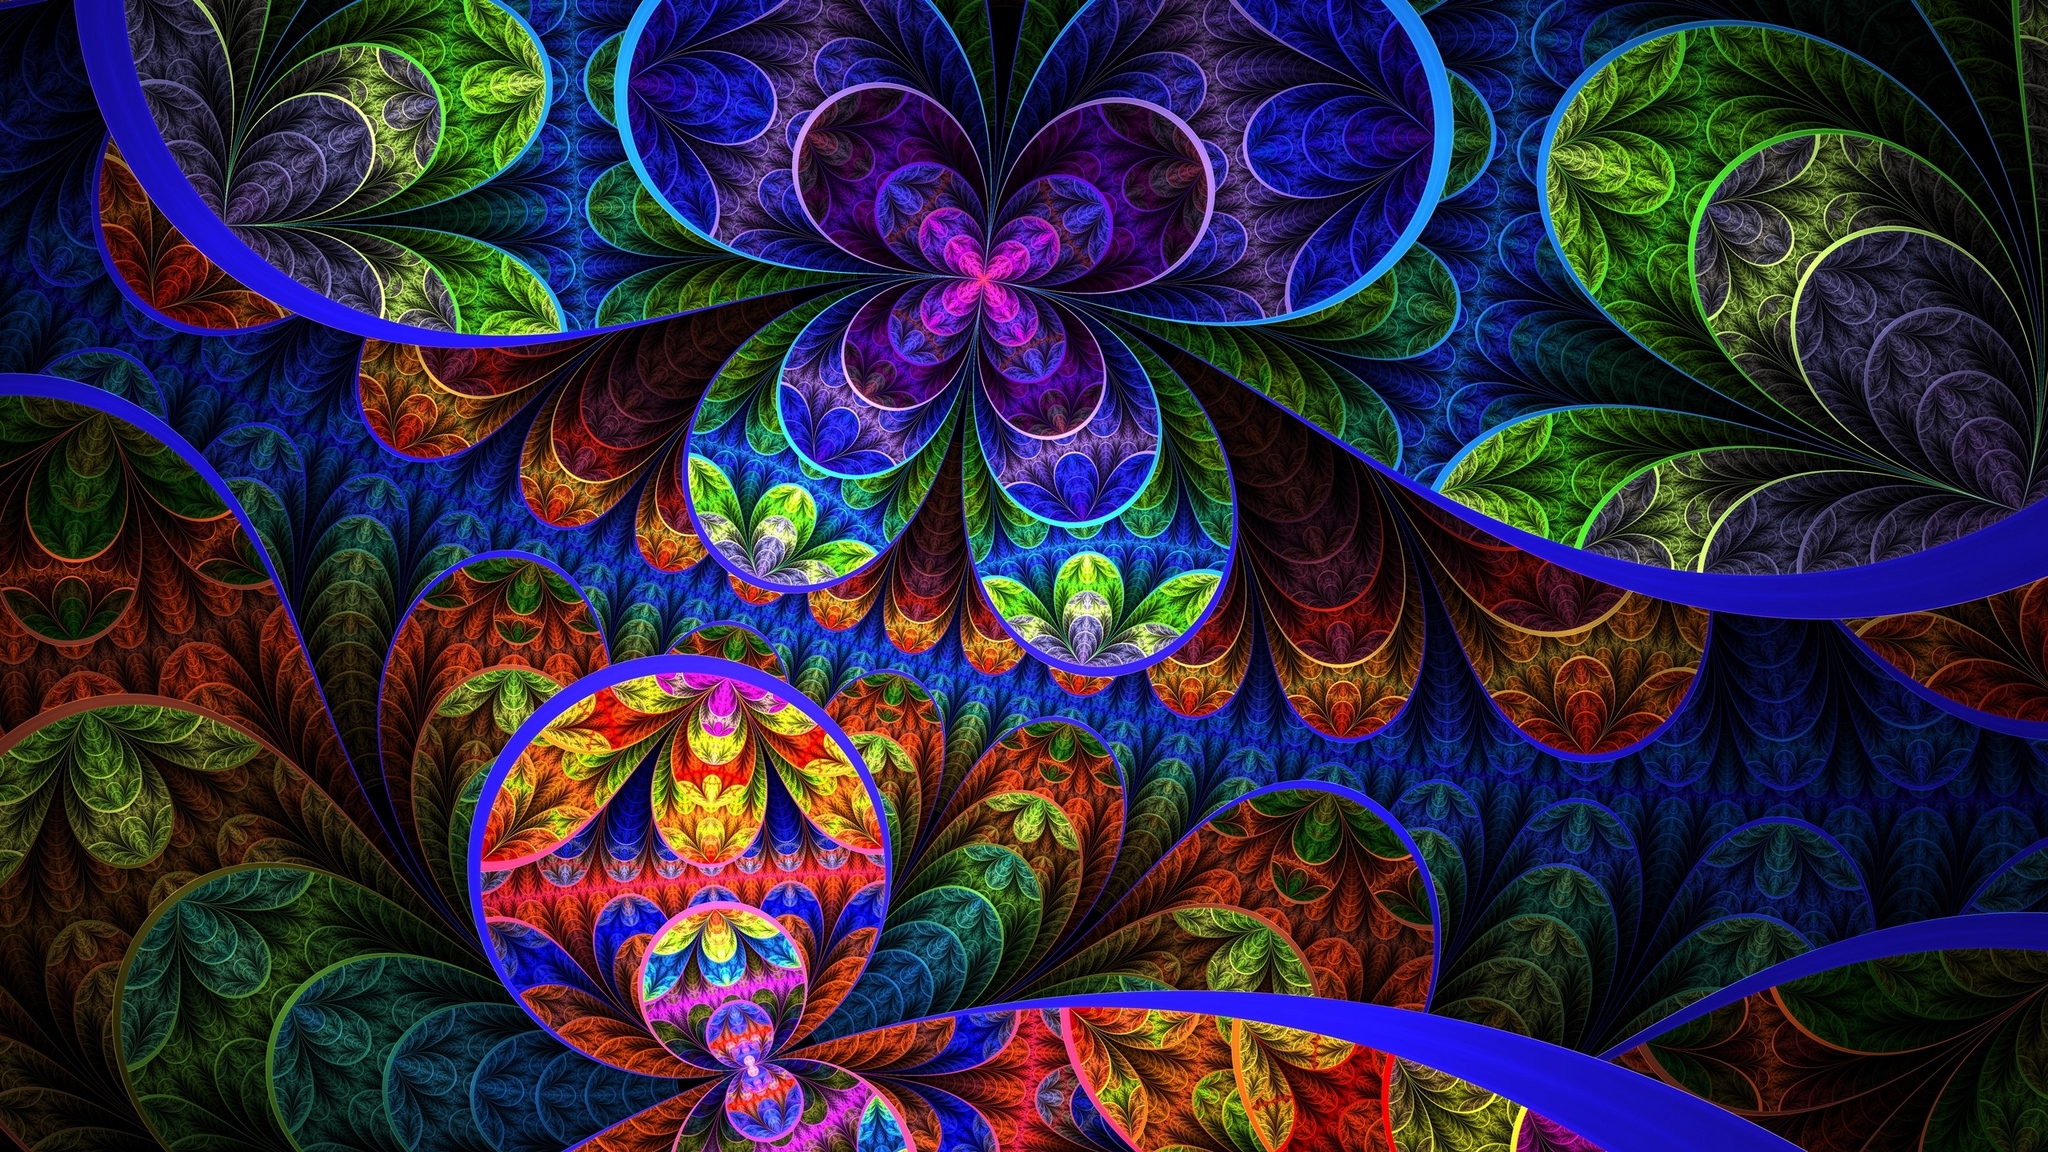 Wallpaper Color, Background, Colorful, Patterns - Fractal Psychedelic Art Wallpaper Hd - HD Wallpaper 